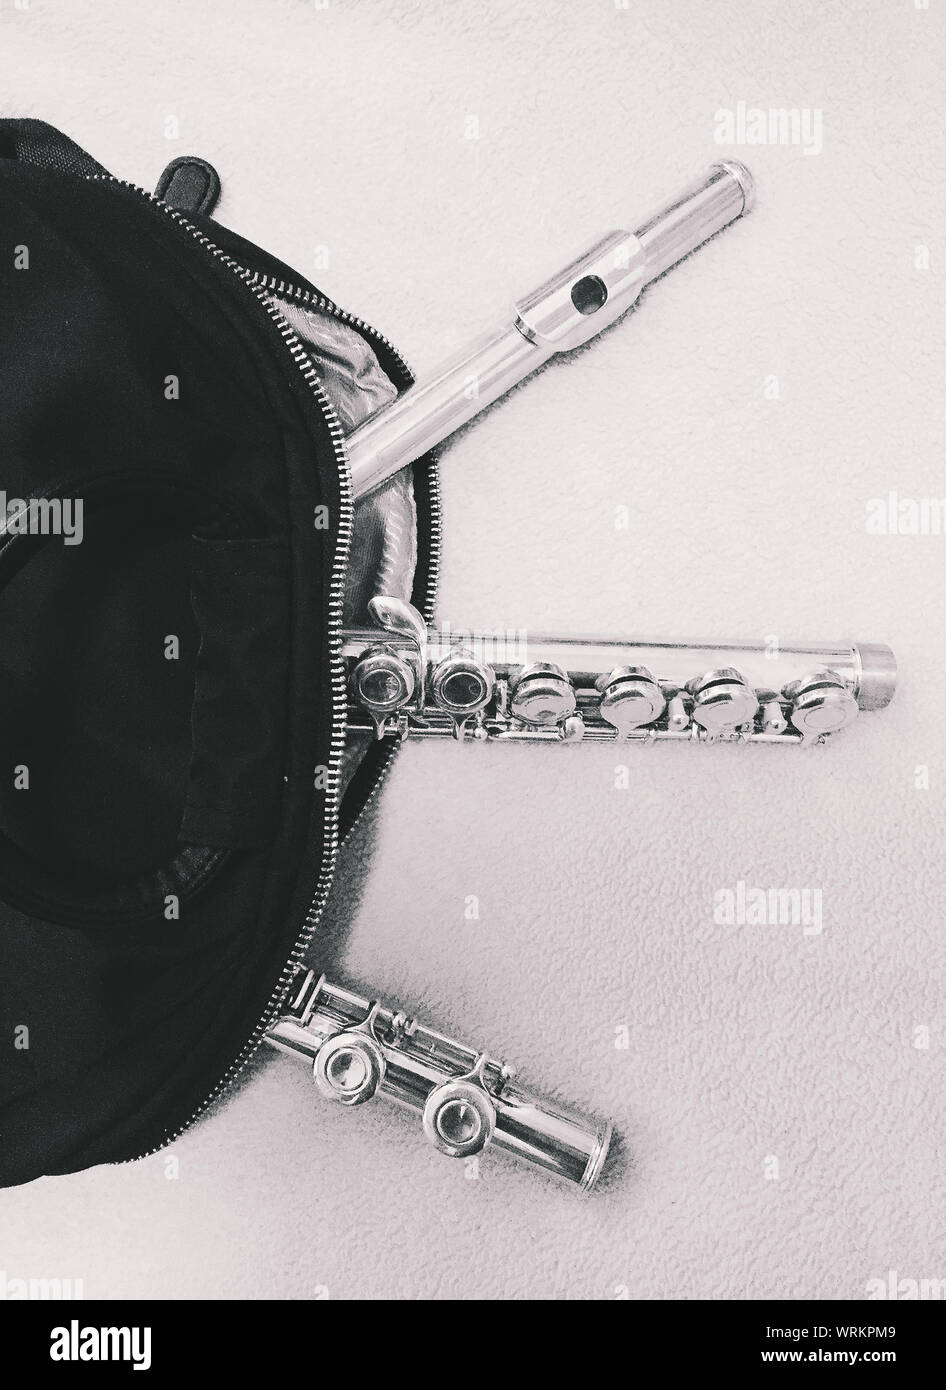 High Angle View Of Clarinets On Table Stock Photo